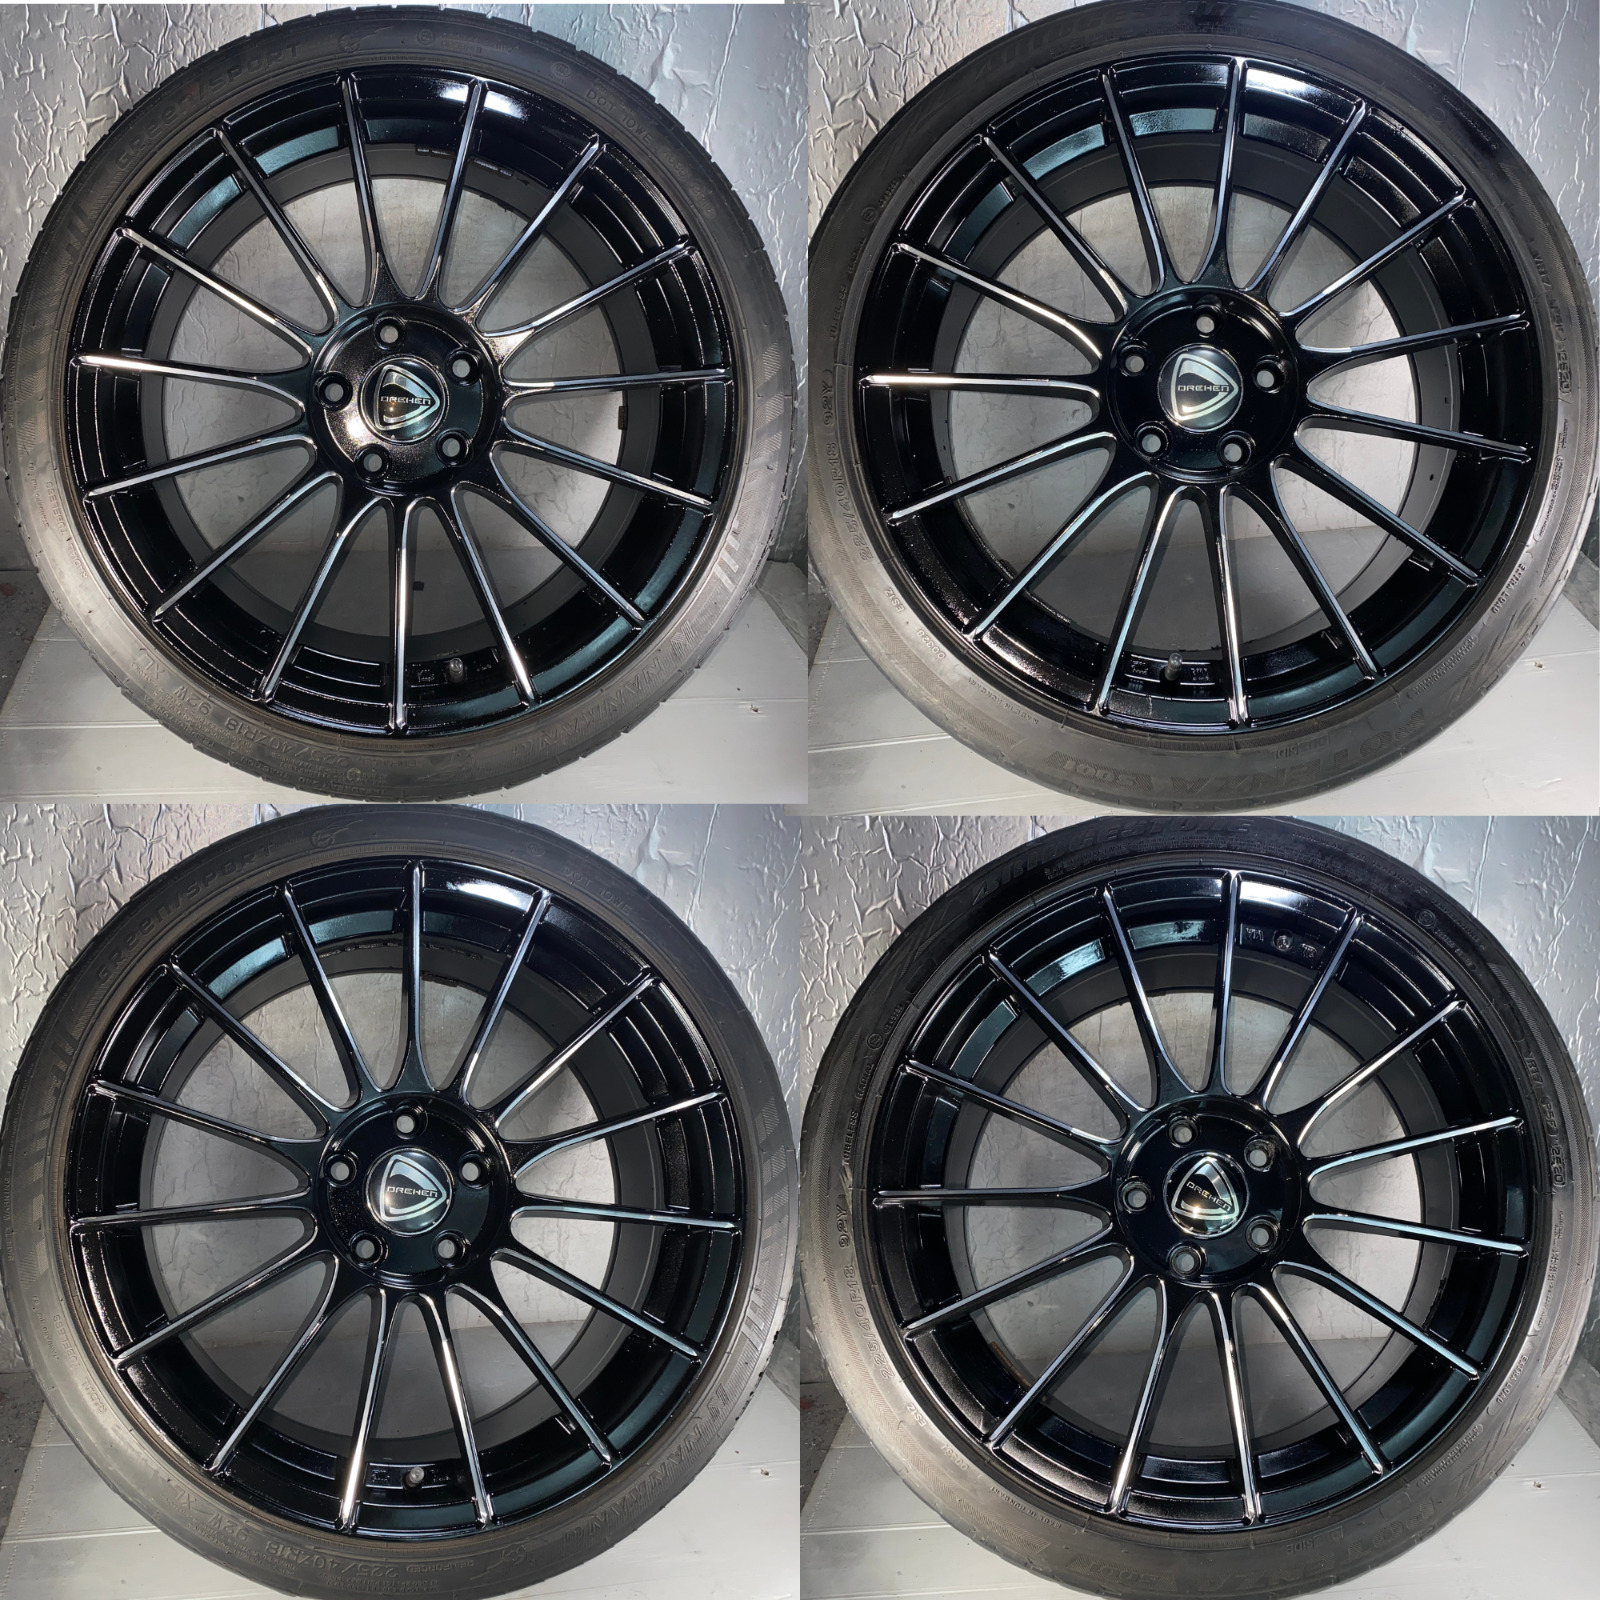 SET OF 4 18 INCH ALLOY WHEELS 18x8JJ ET42 5 STUD WILL FIT SCIROCCO